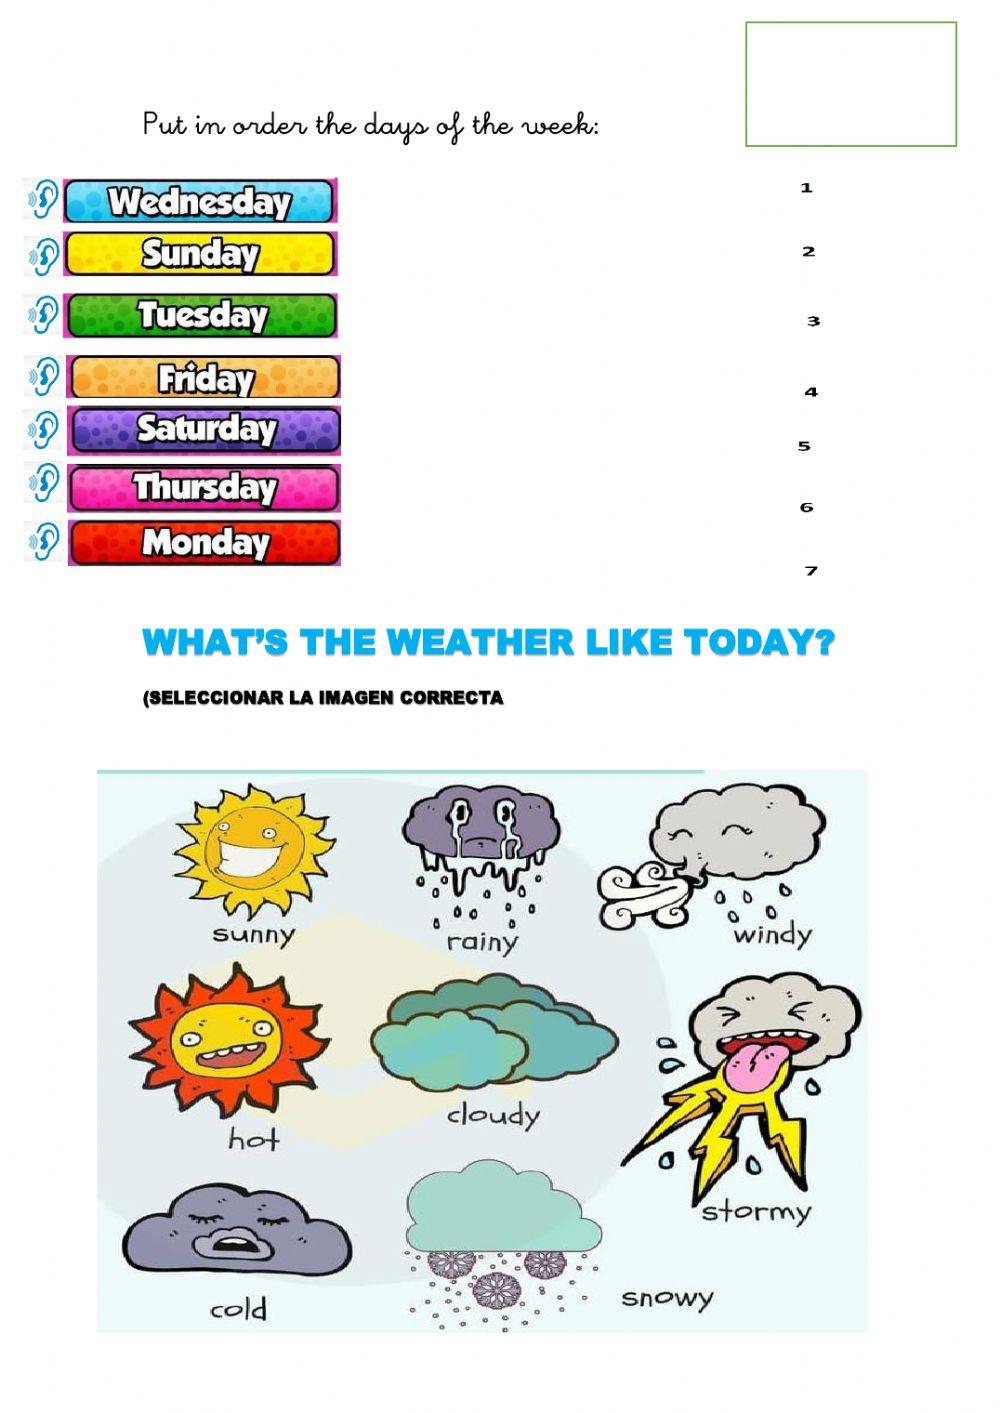 Routine days of the week weather